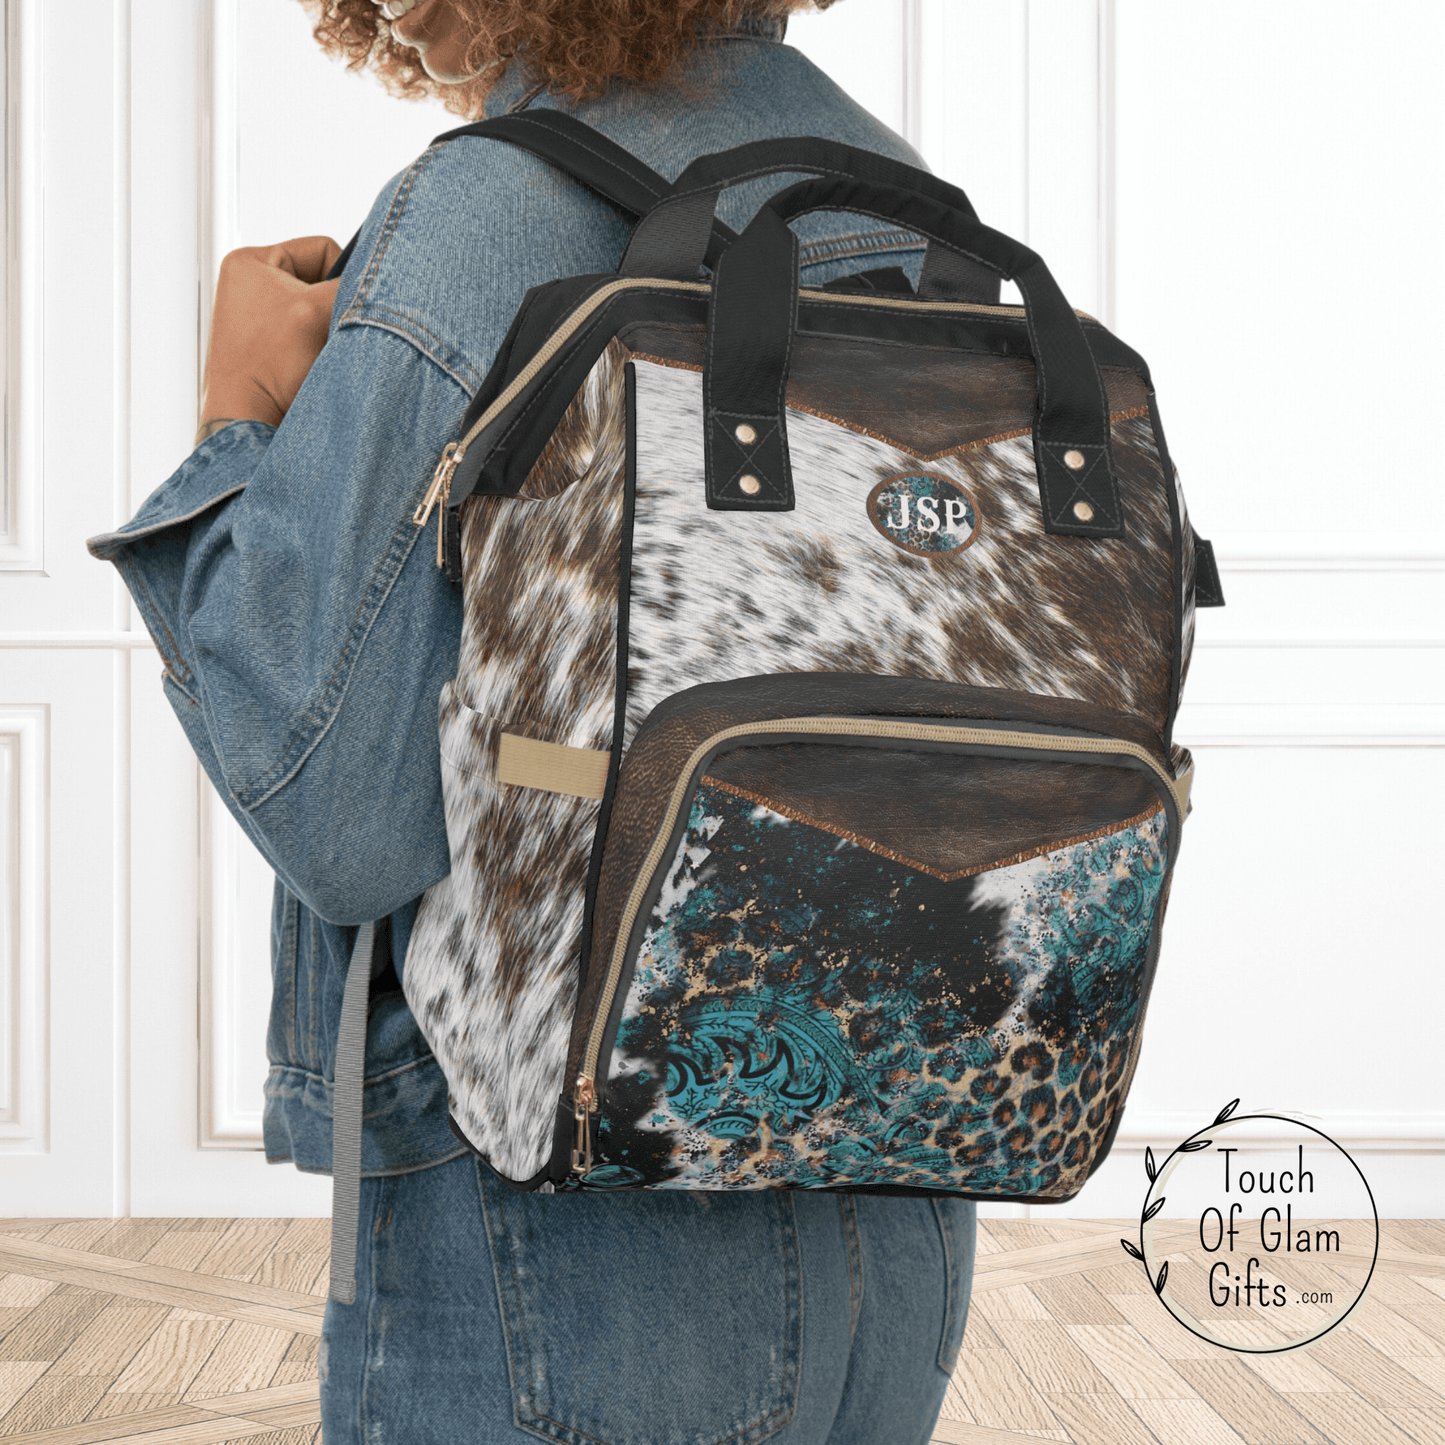 This custom diaper bag backpack is a cowhide print with brown leather print on durable nylon fabric. The front exterior zippered compartment has a print with cowhide, leopard print and turquoise for a western look on this multipurpose diaper backpack.